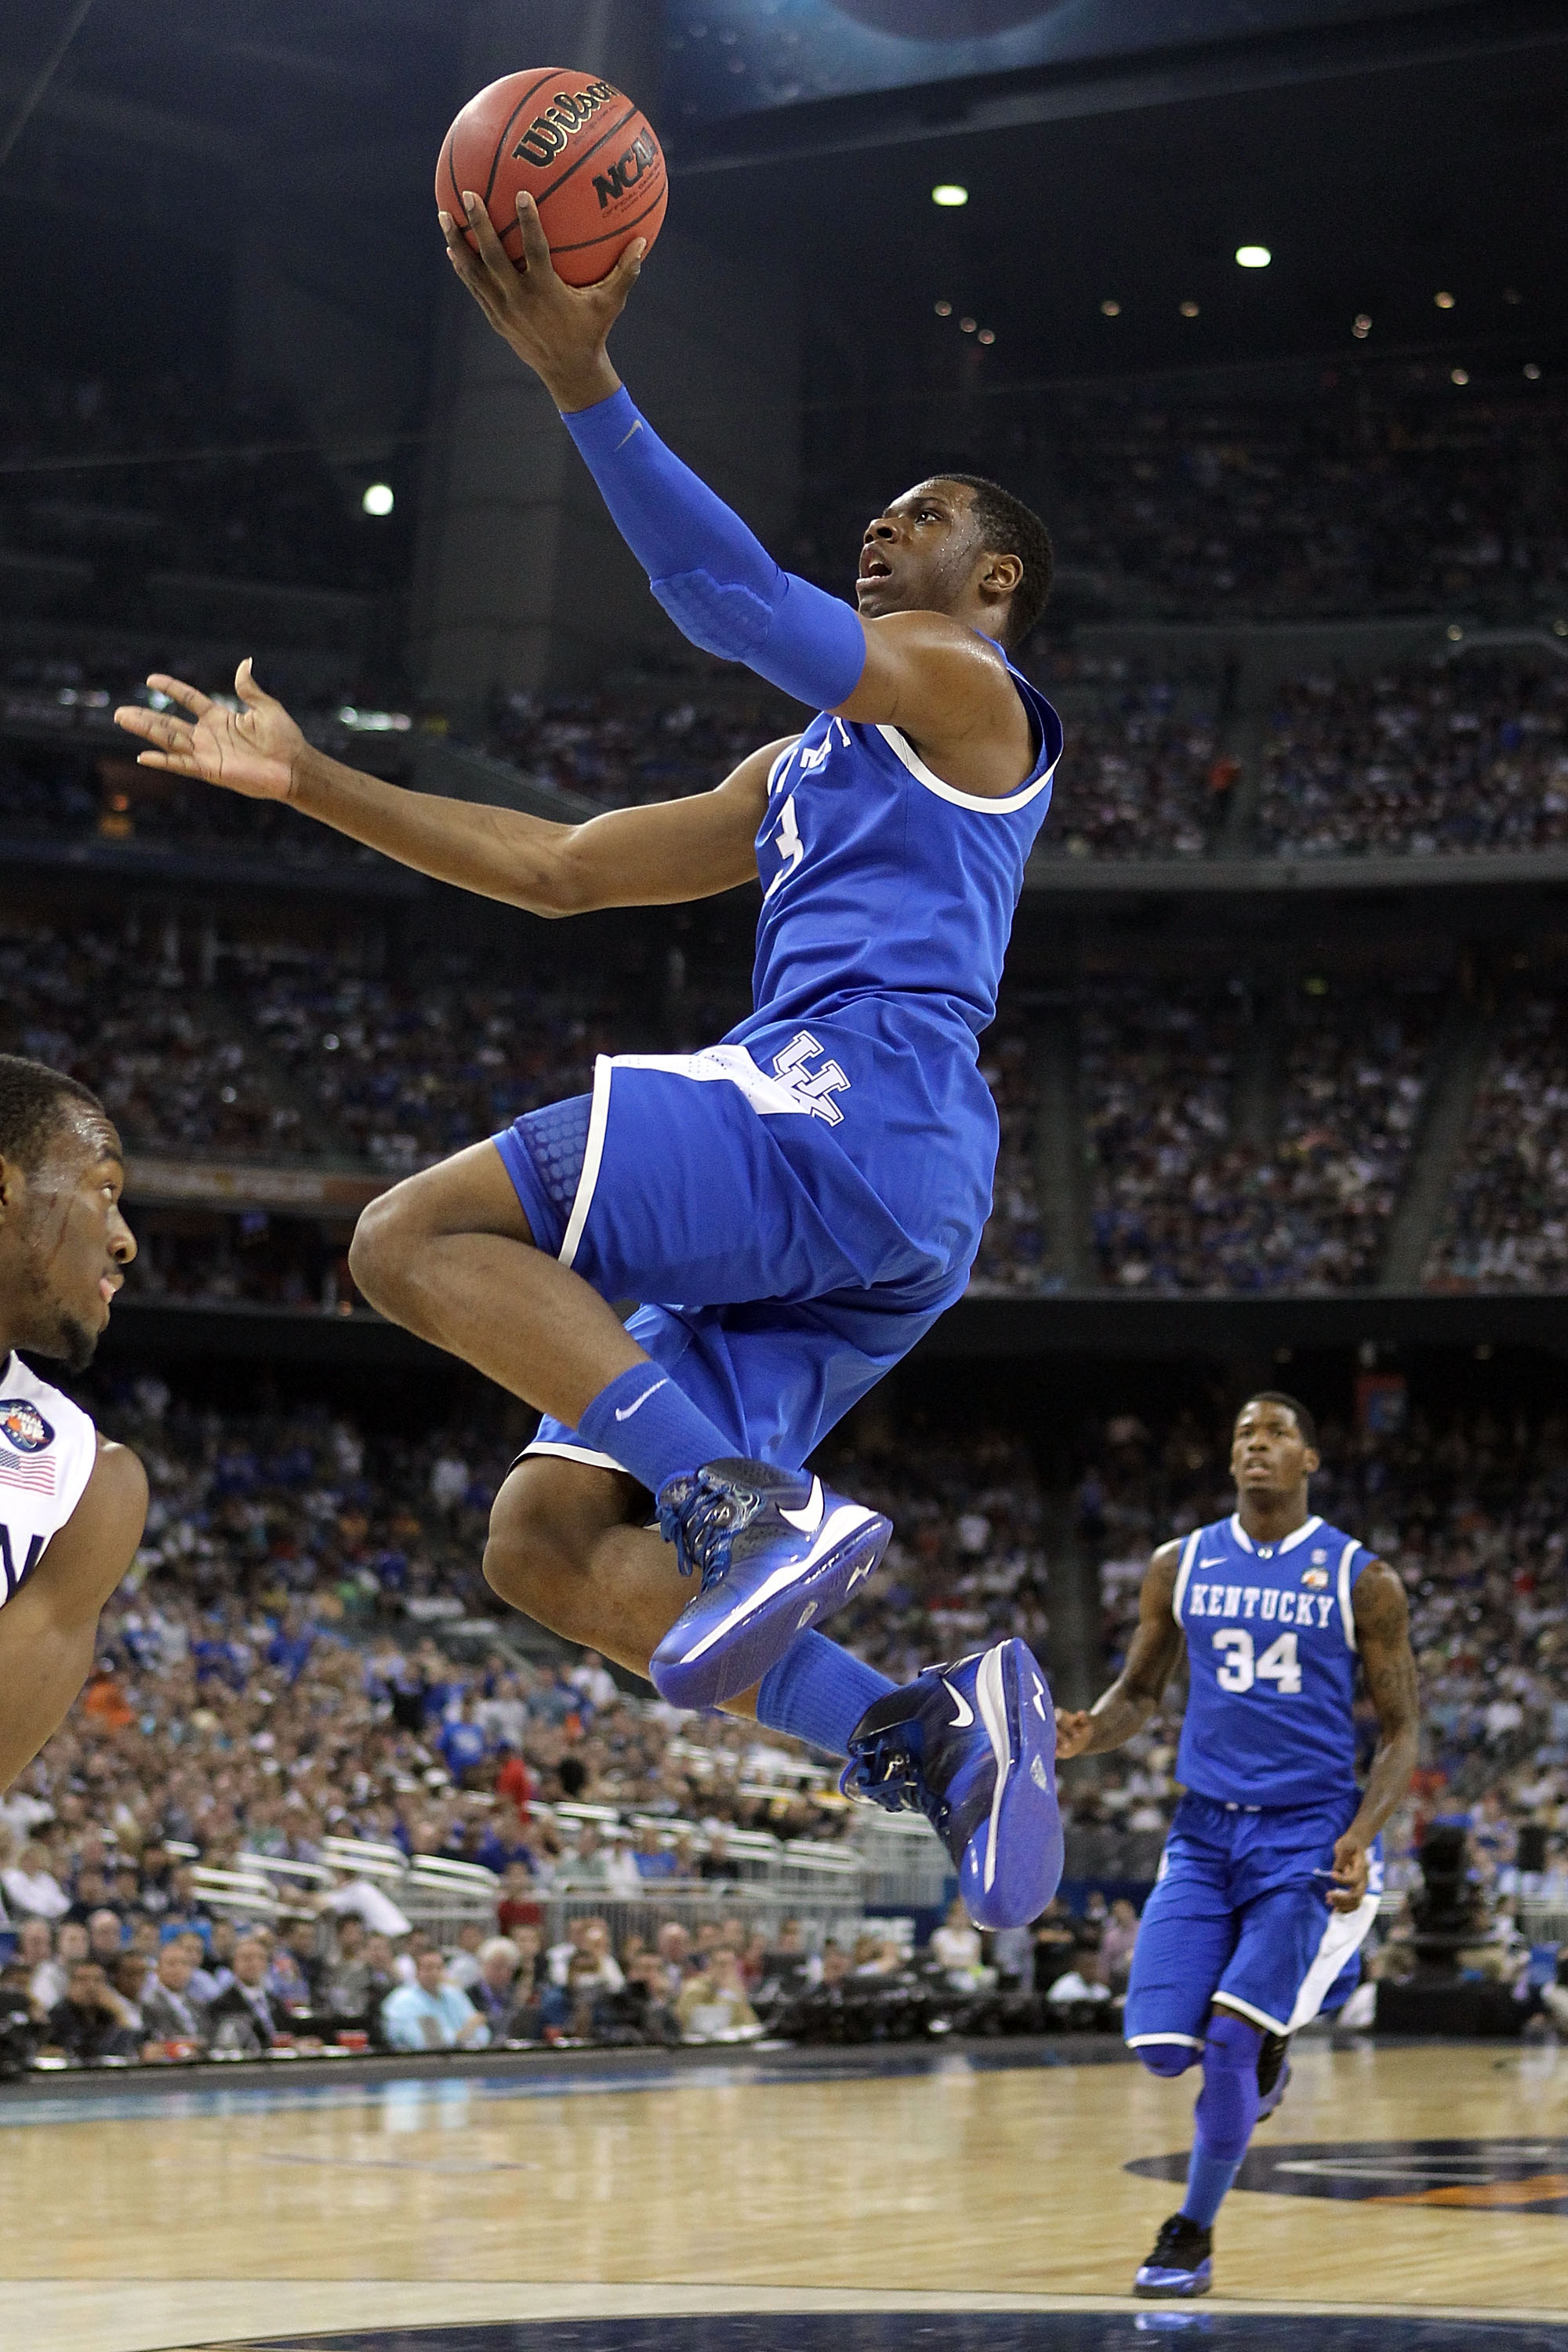 HOUSTON, TX - APRIL 02:  Terrence Jones #3 of the Kentucky Wildcats goes to the hoop against the Connecticut Huskies during the National Semifinal game of the 2011 NCAA Division I Men's Basketball Championship at Reliant Stadium on April 2, 2011 in Housto